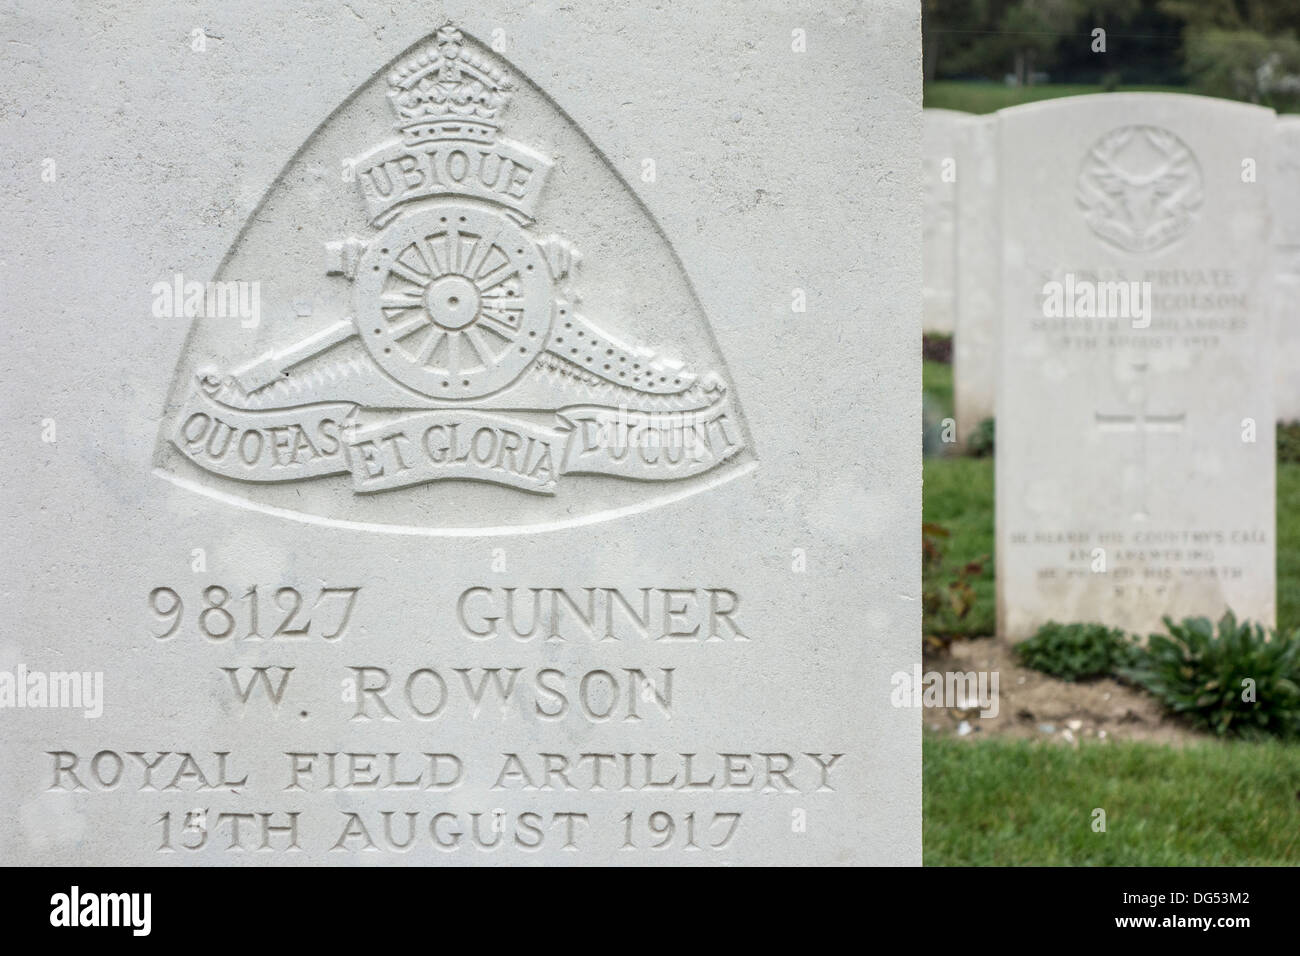 Royal Field Artillery regimental badge on headstone of World War One soldier, Cemetery of the Commonwealth War Graves Commission Stock Photo